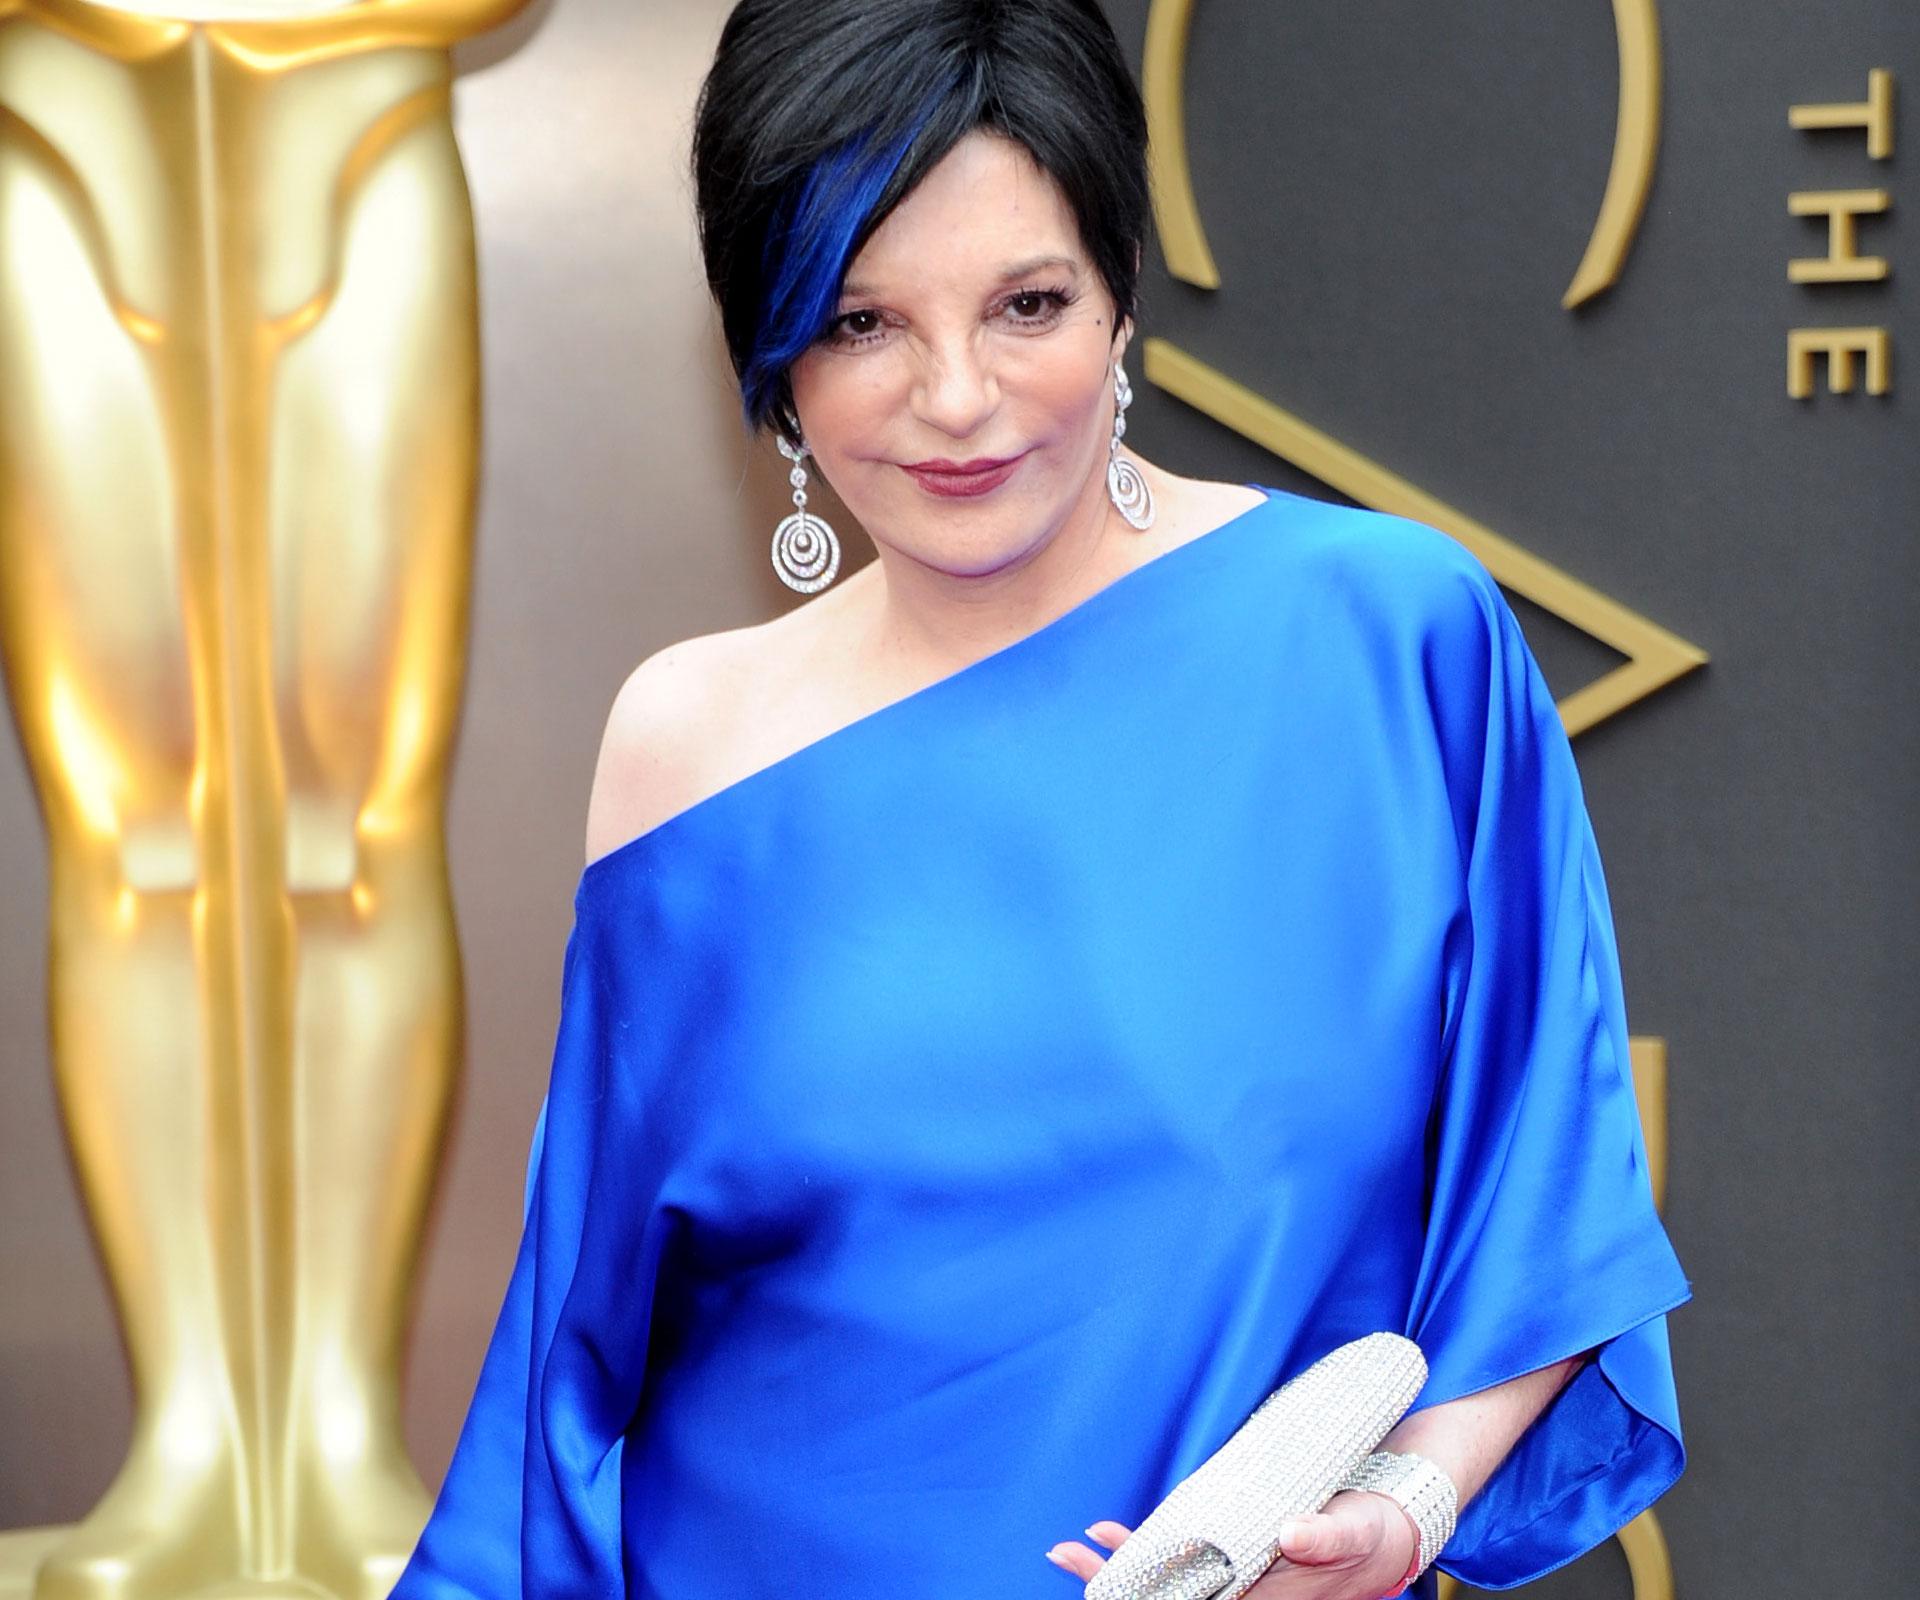 Liza Minnelli in rehab for substance abuse